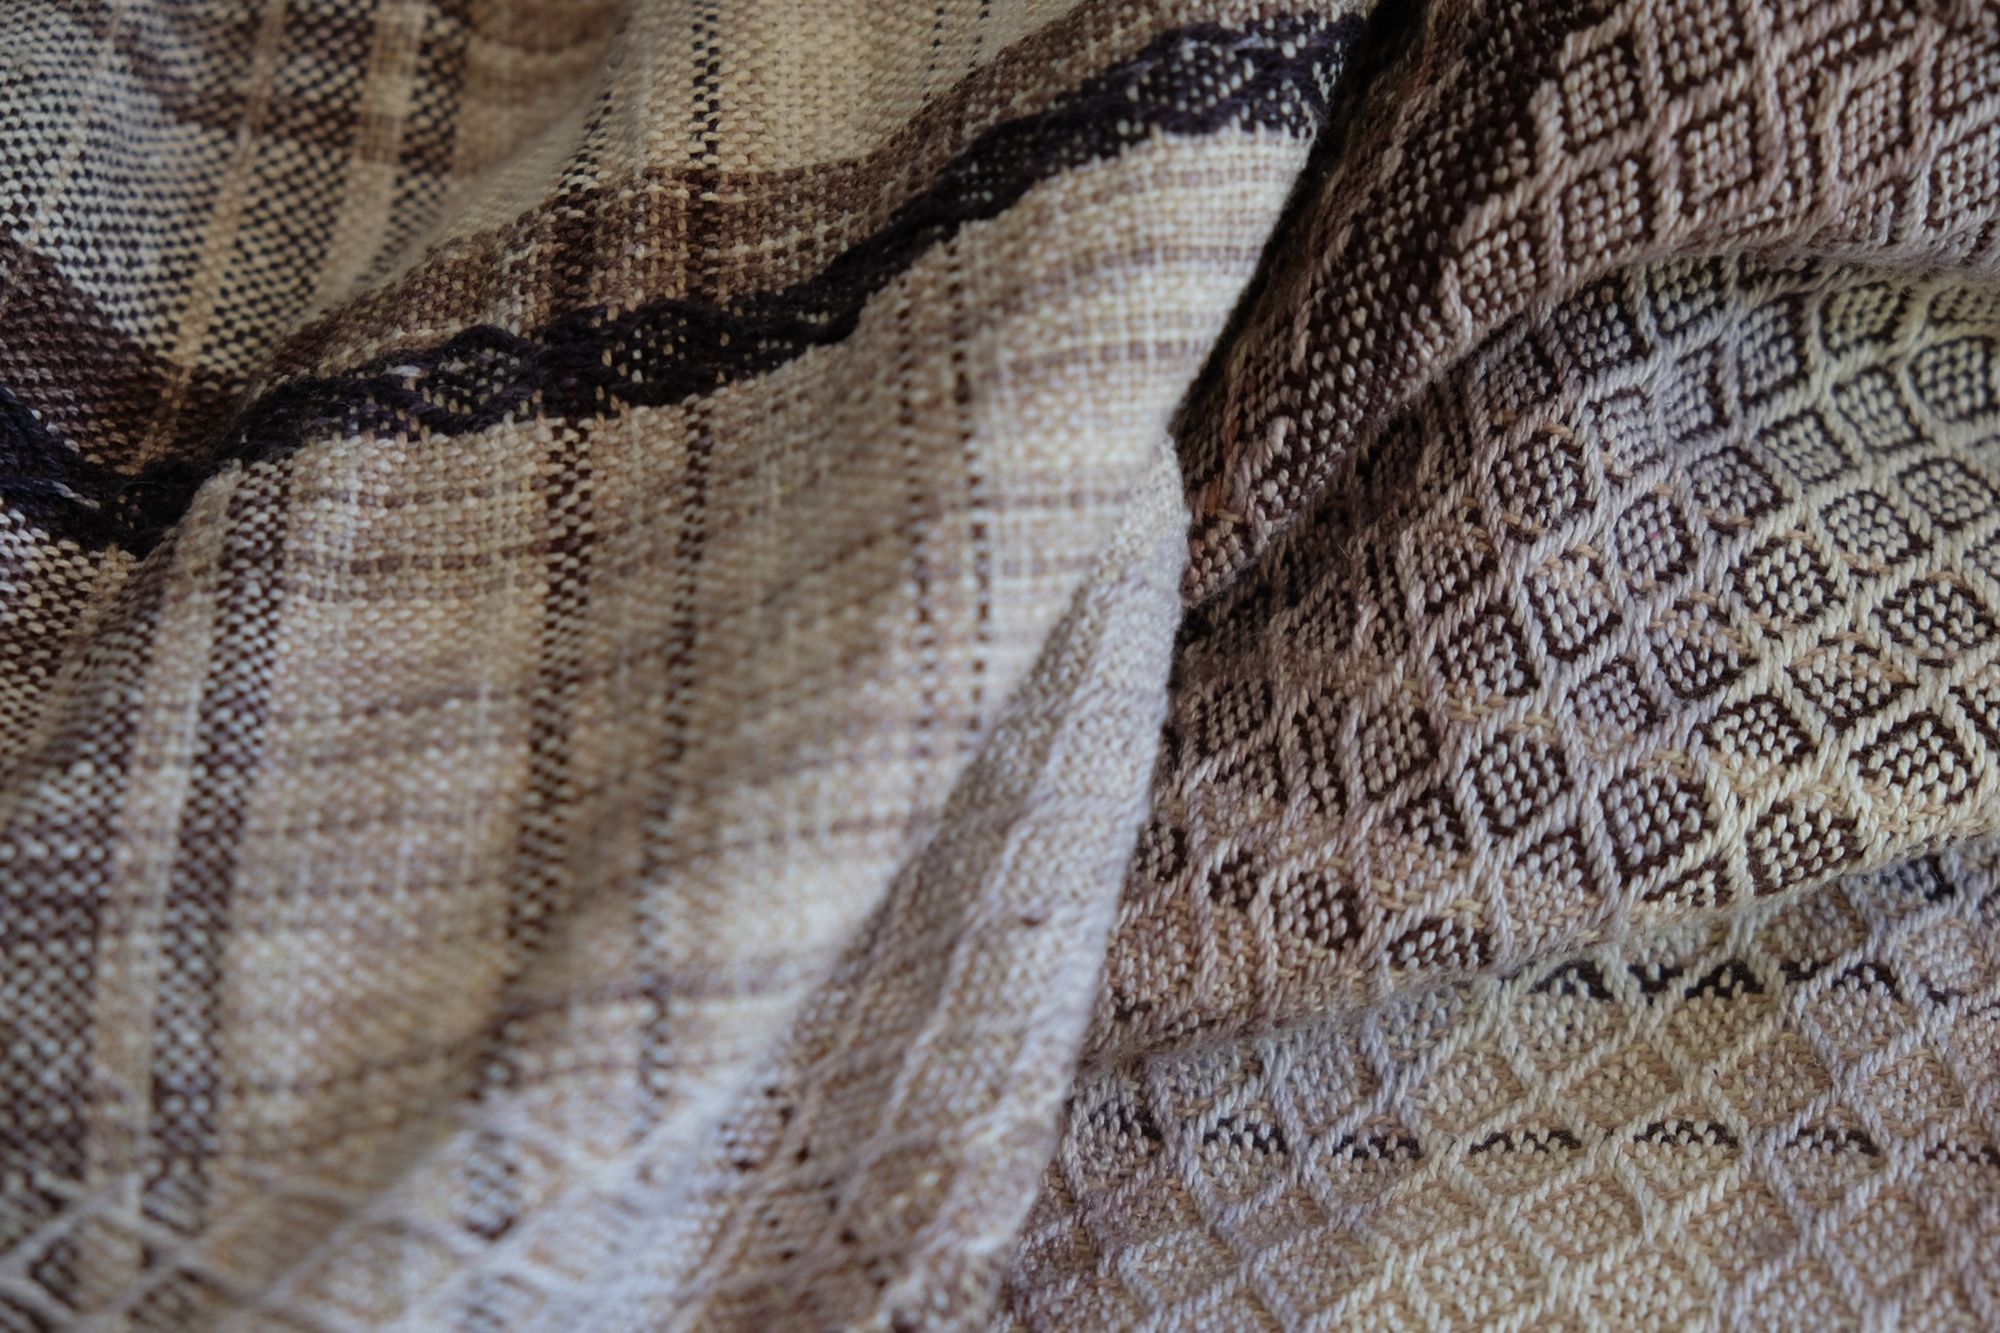 detail of Multi colored handwoven raw silk fabric laying on a wooden floor